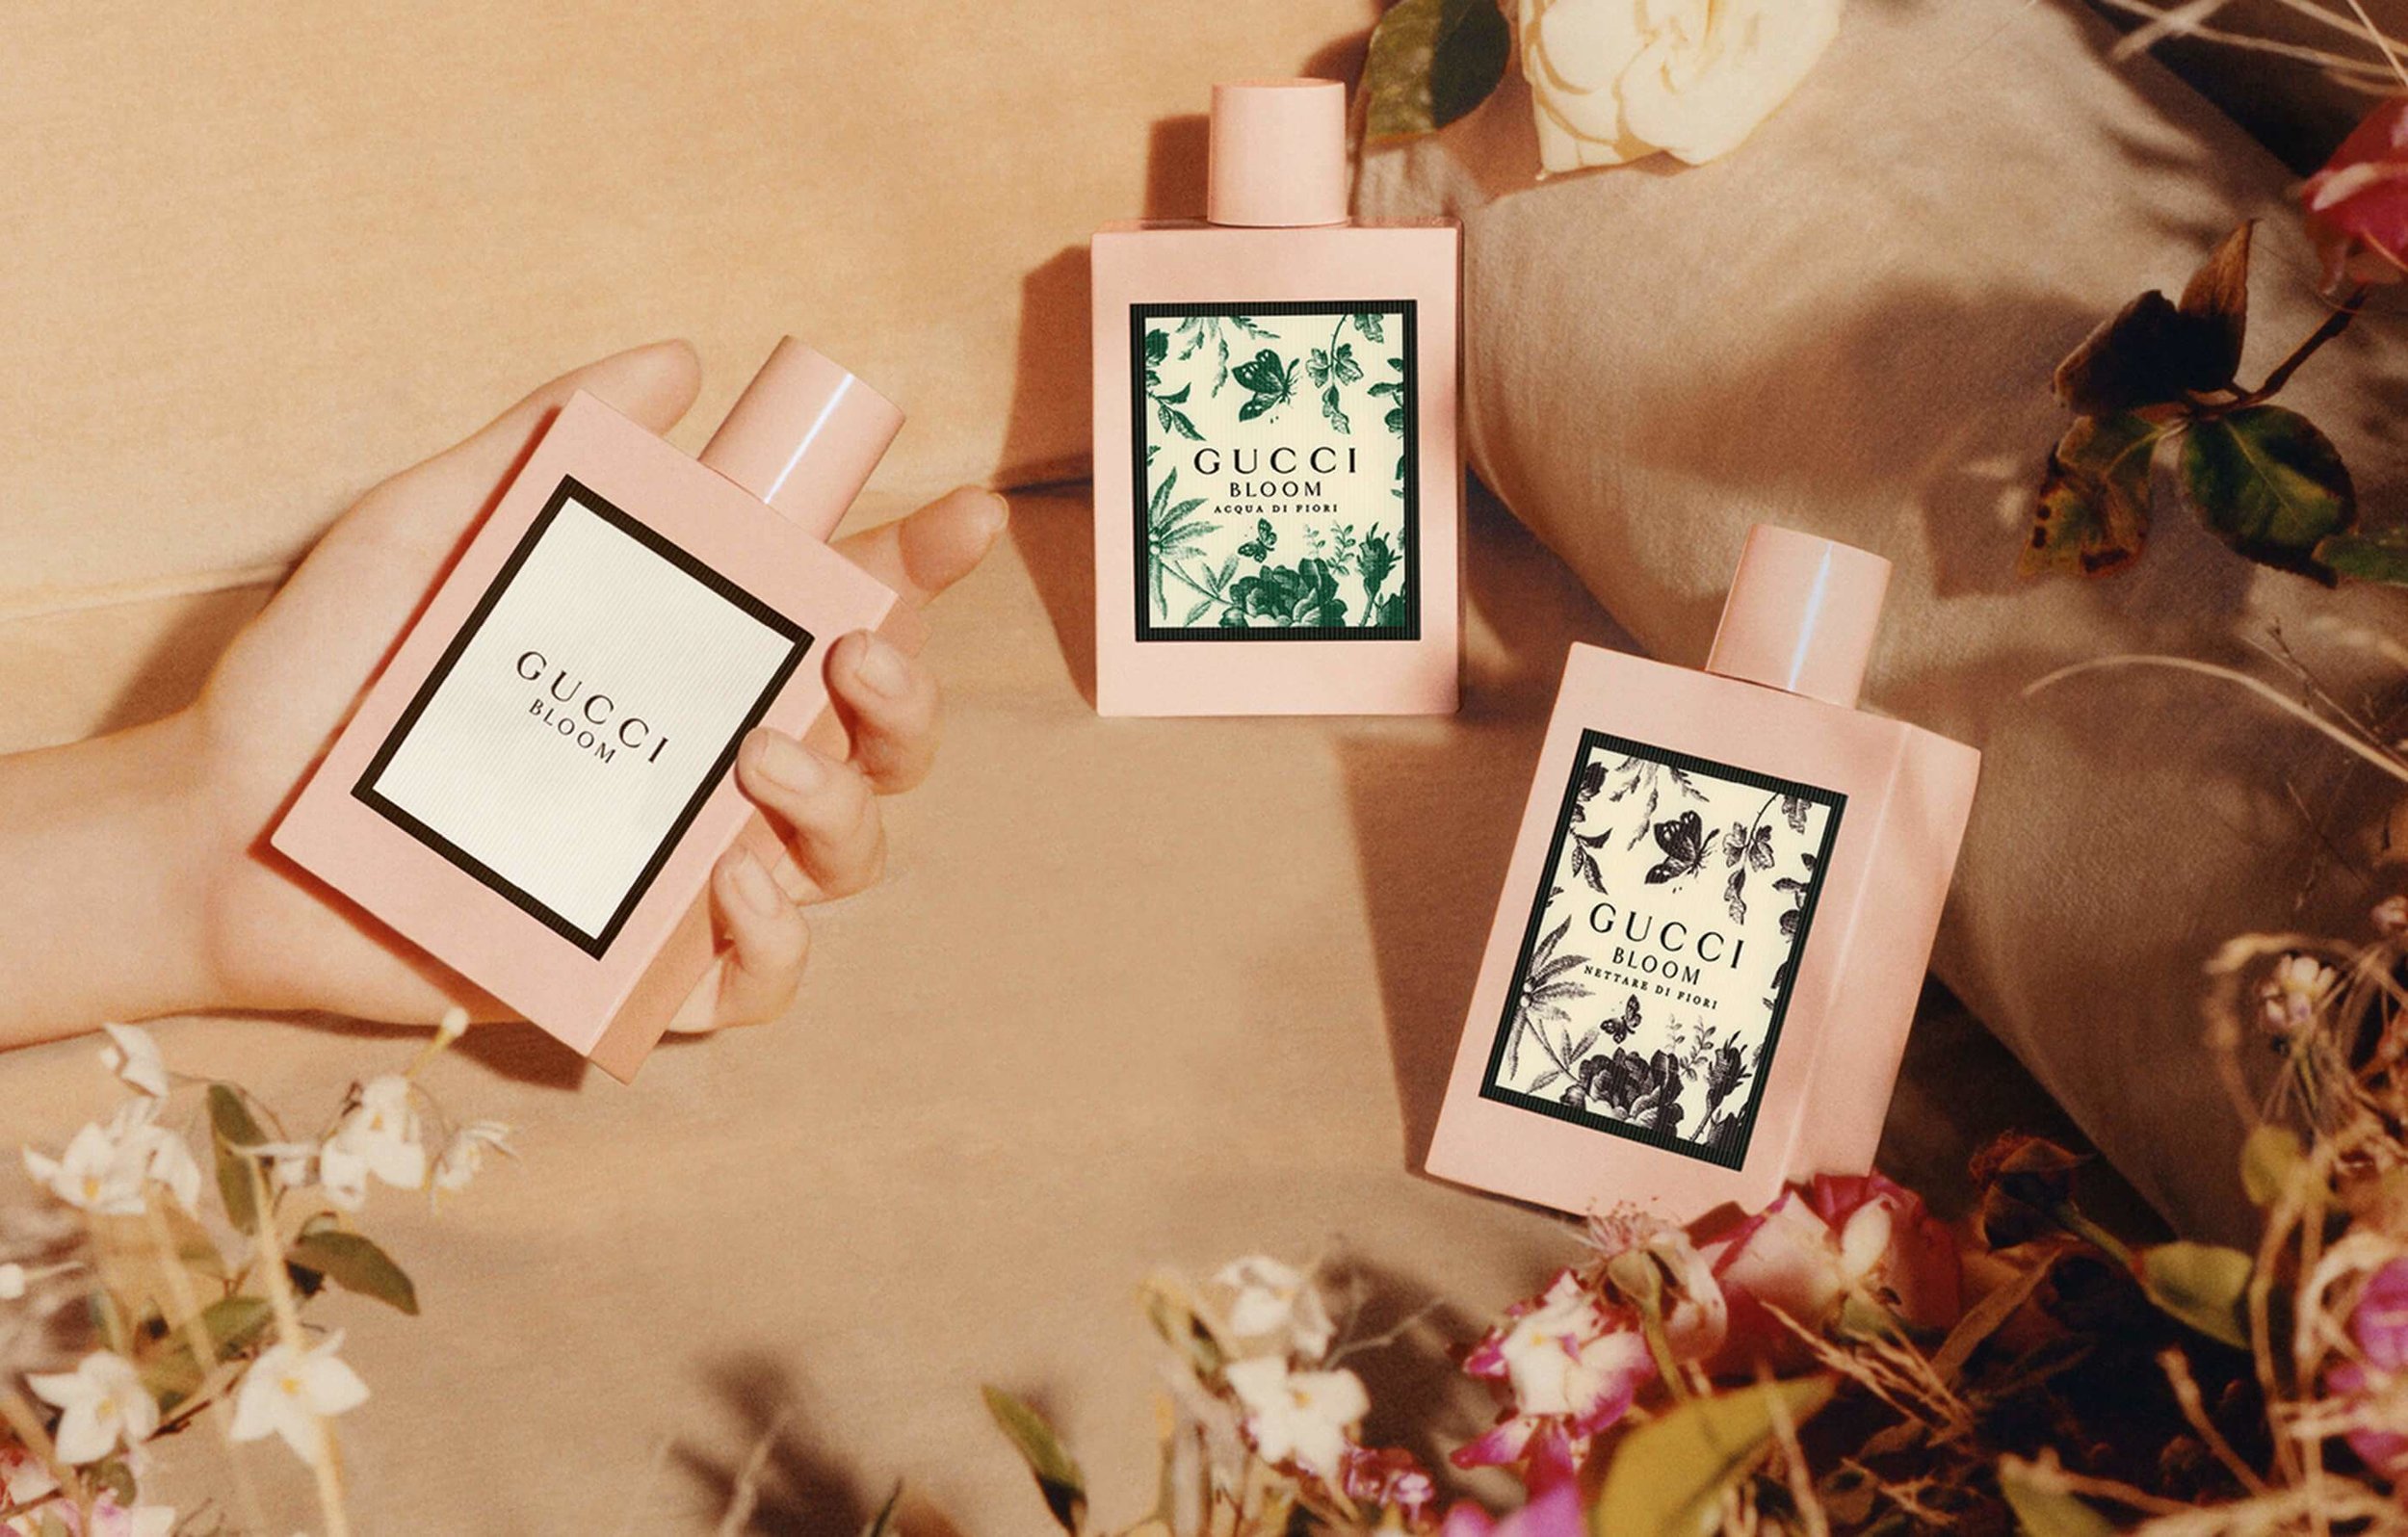  The marvelous Bloom fragrances from  Gu  c  ci . 